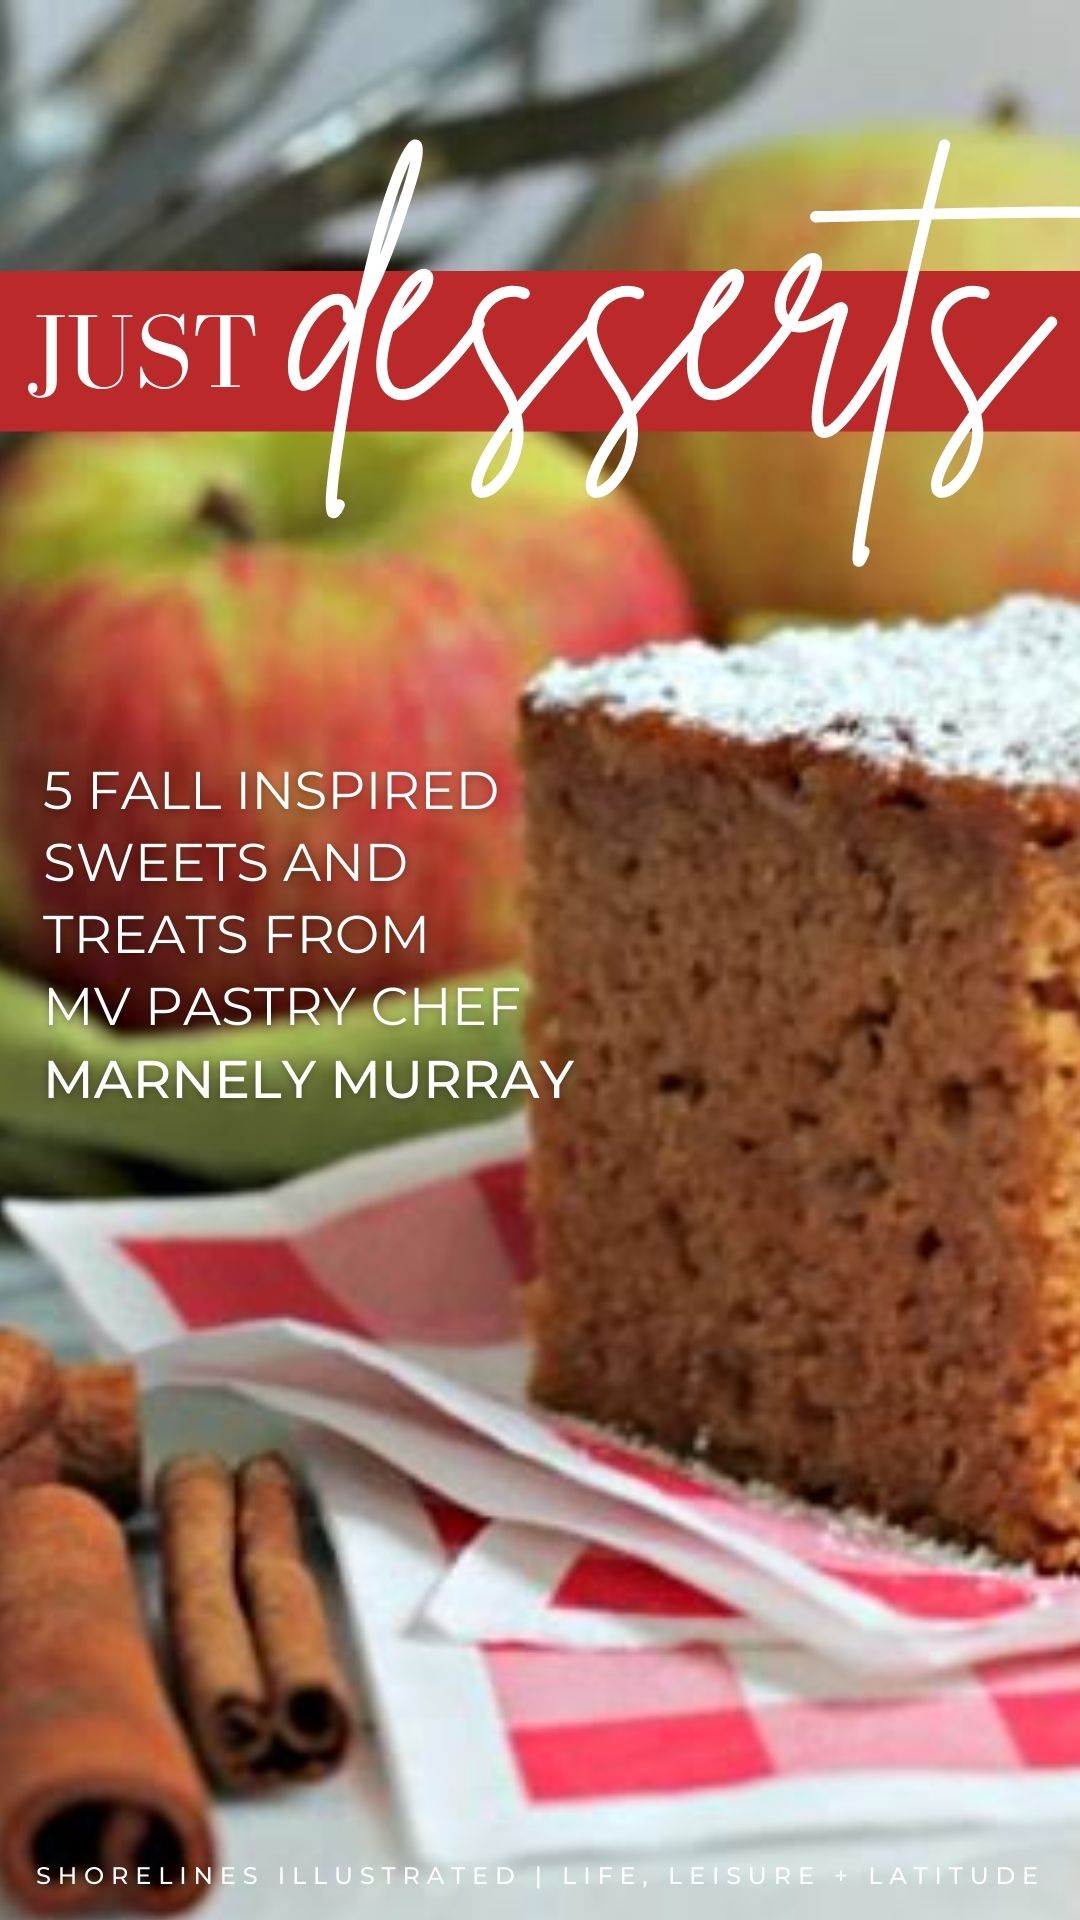 marnely murray cooking with books PIN